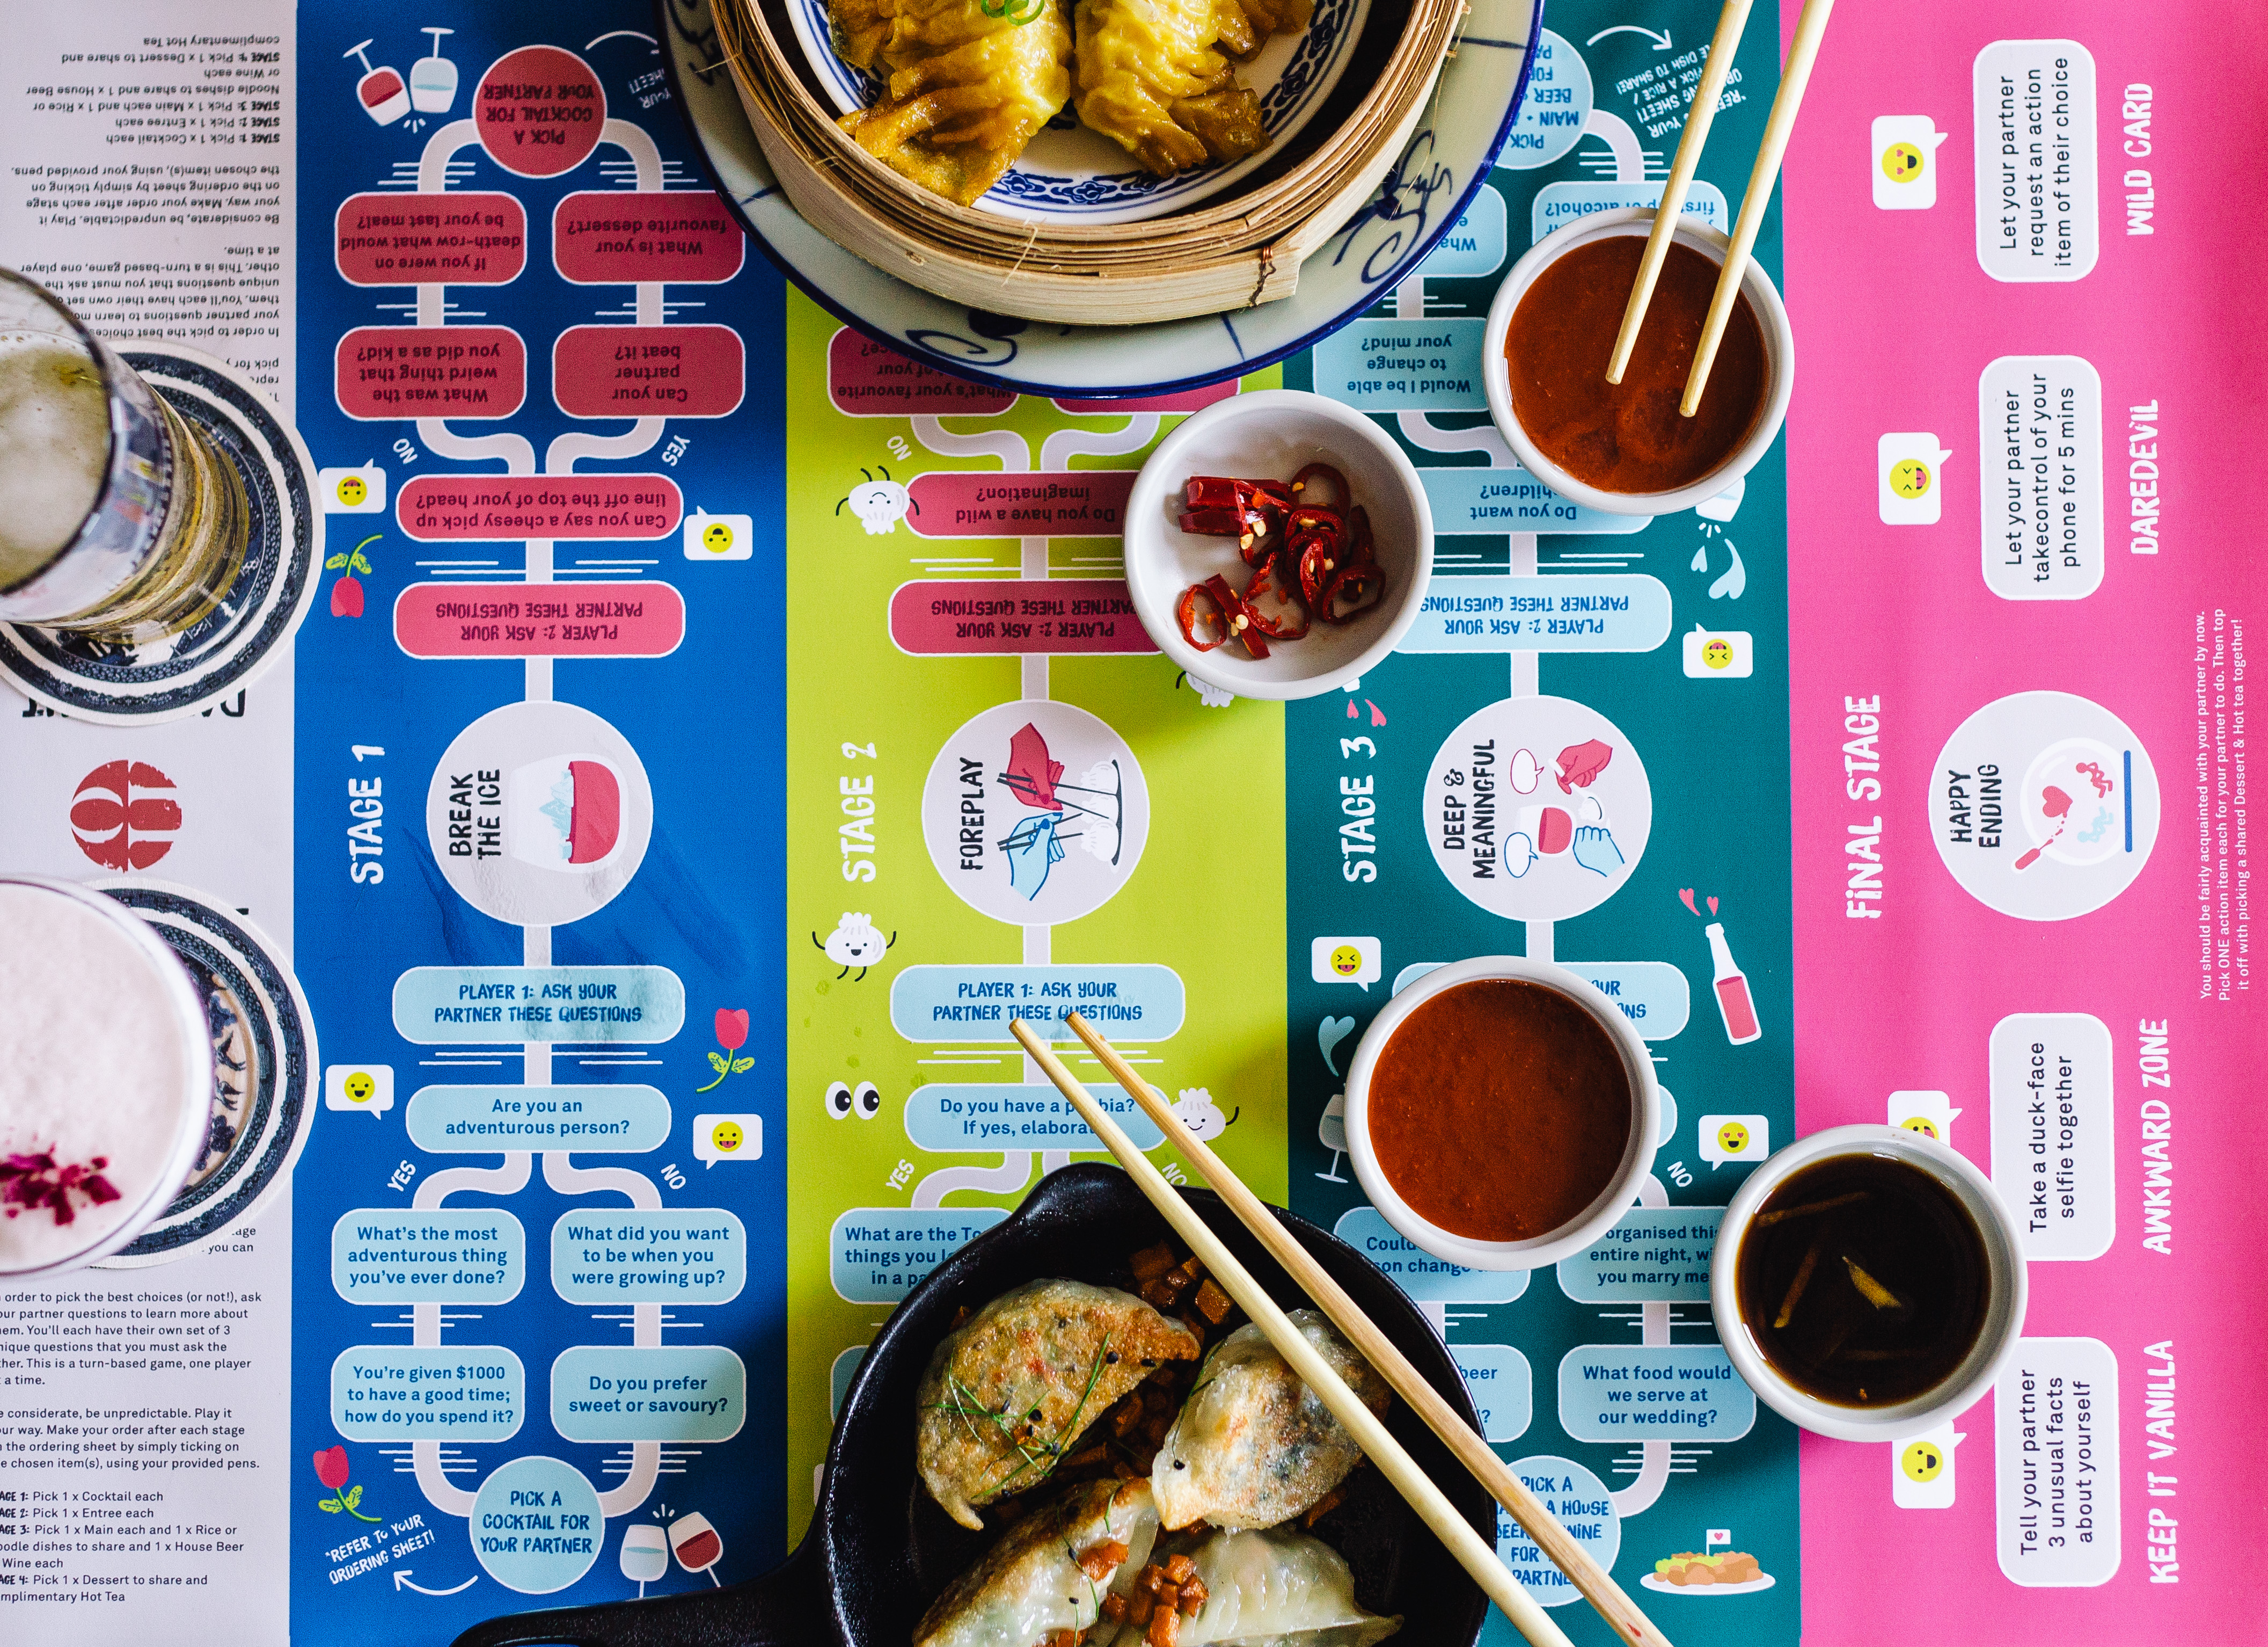 Dating boardgame with food scattered atop. Image: Supplied